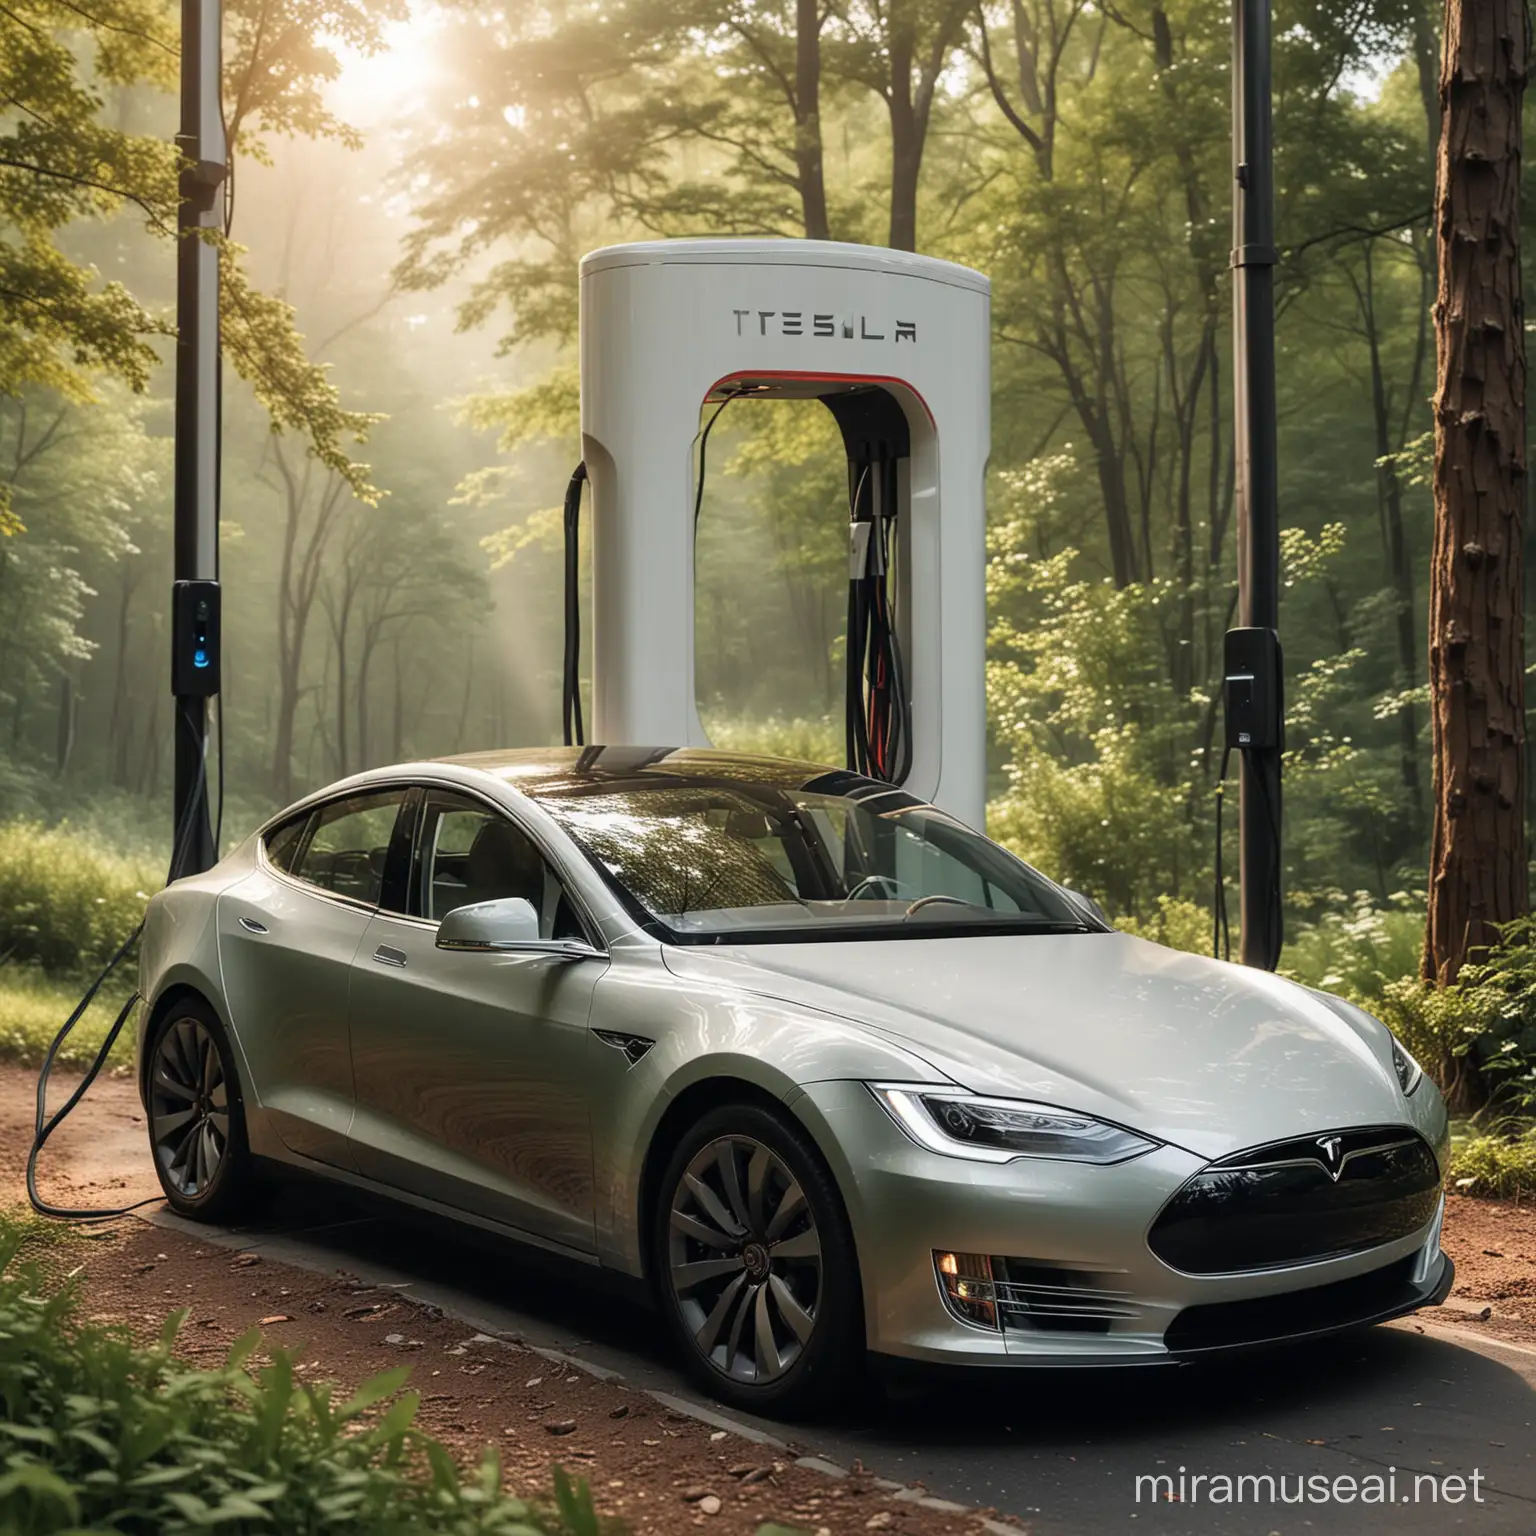 Create me image of tesla car chargin in nature with eco friendly look in mind
